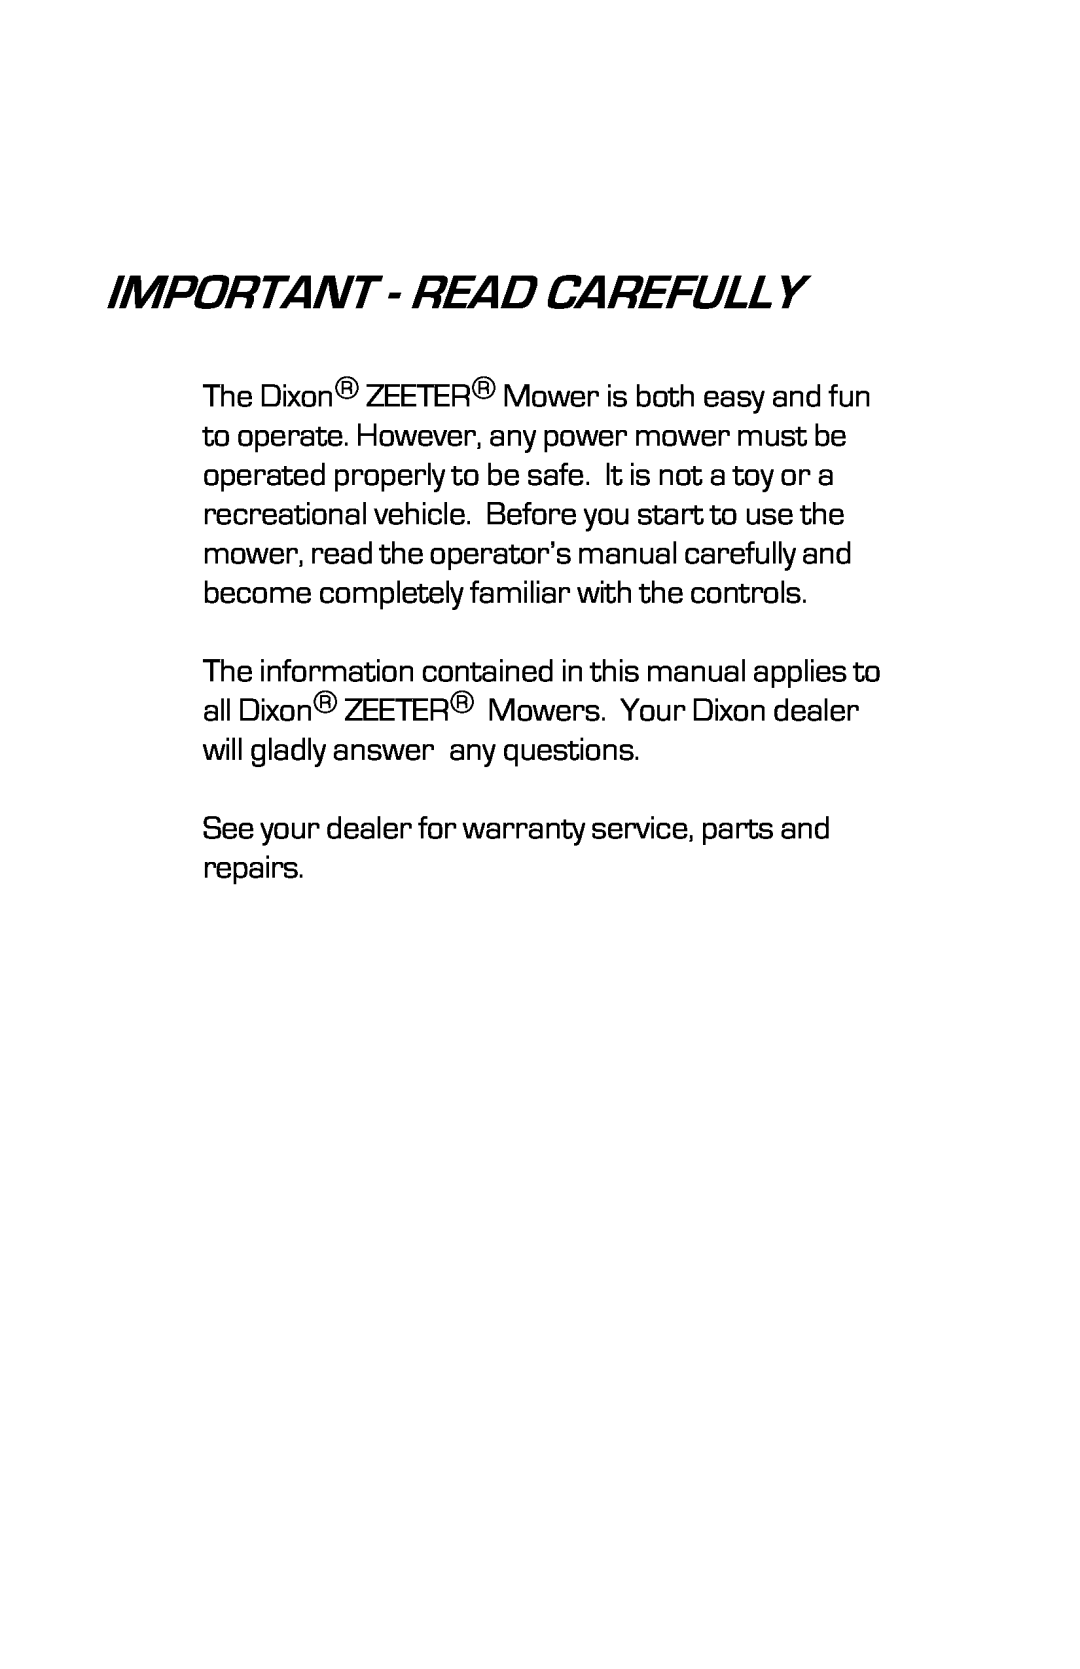 Dixon 2004 manual Important - Read Carefully, See your dealer for warranty service, parts and repairs 